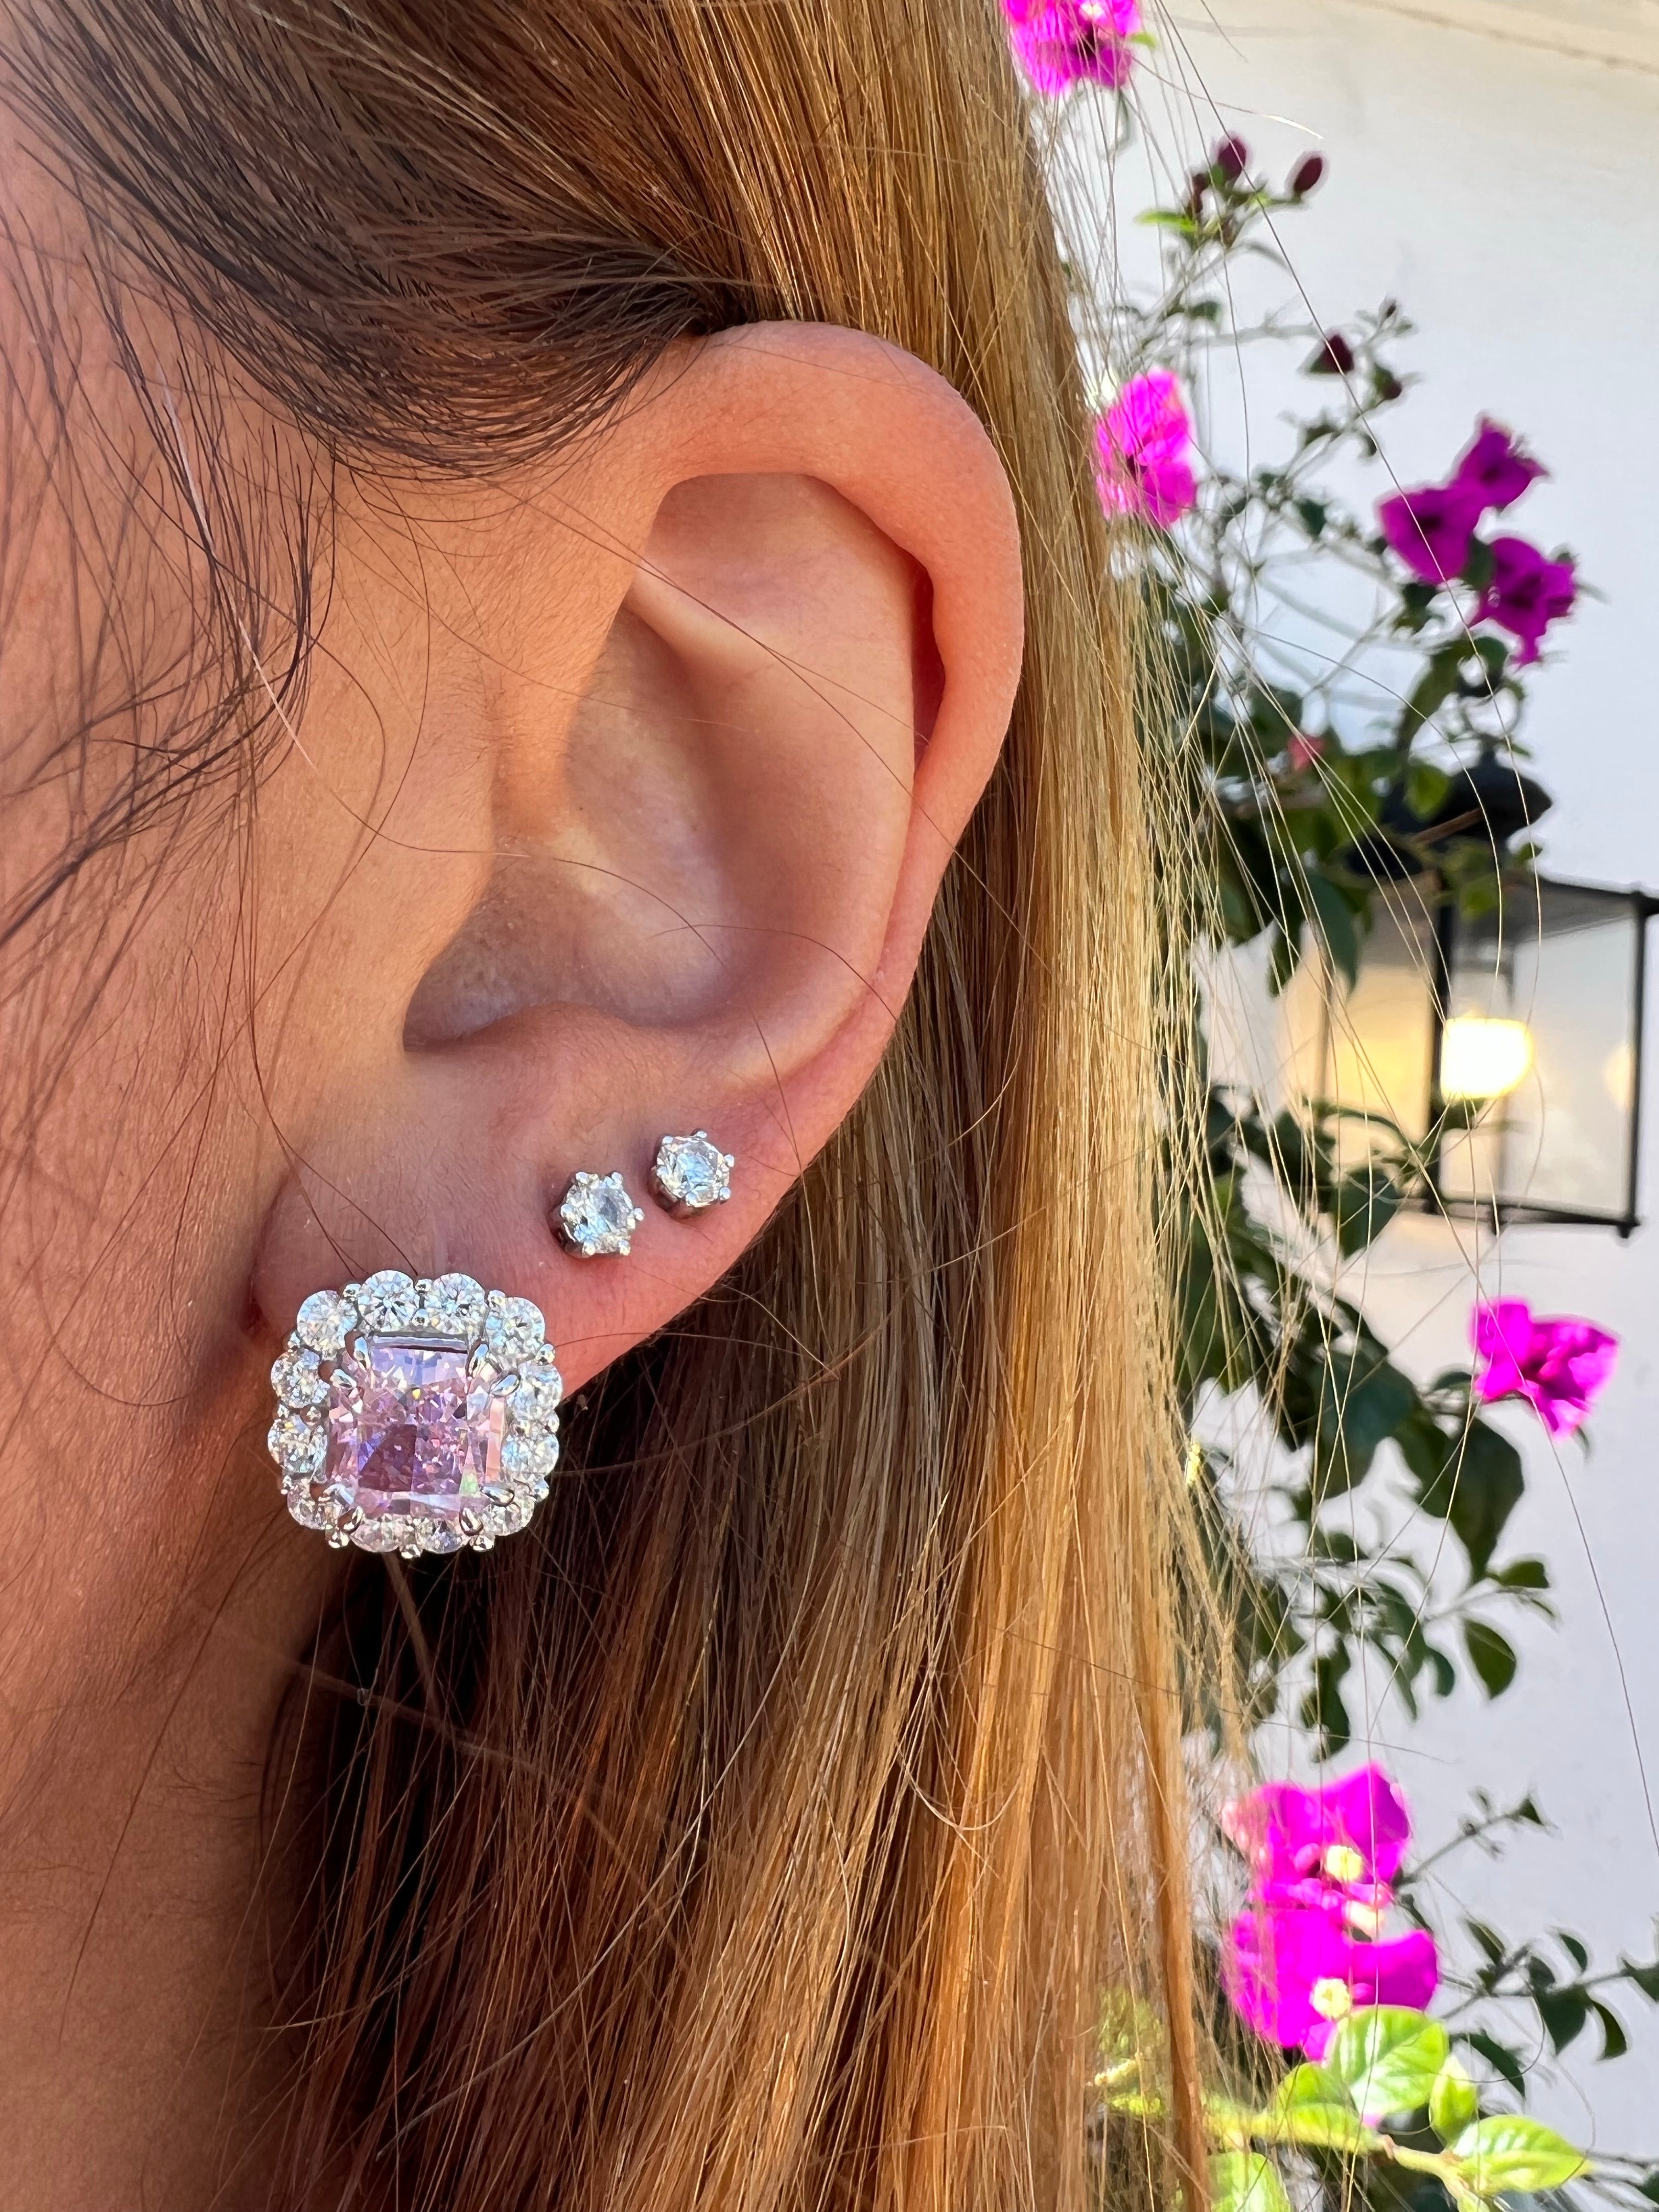 Sterling silver simulated pink sapphire halo studs